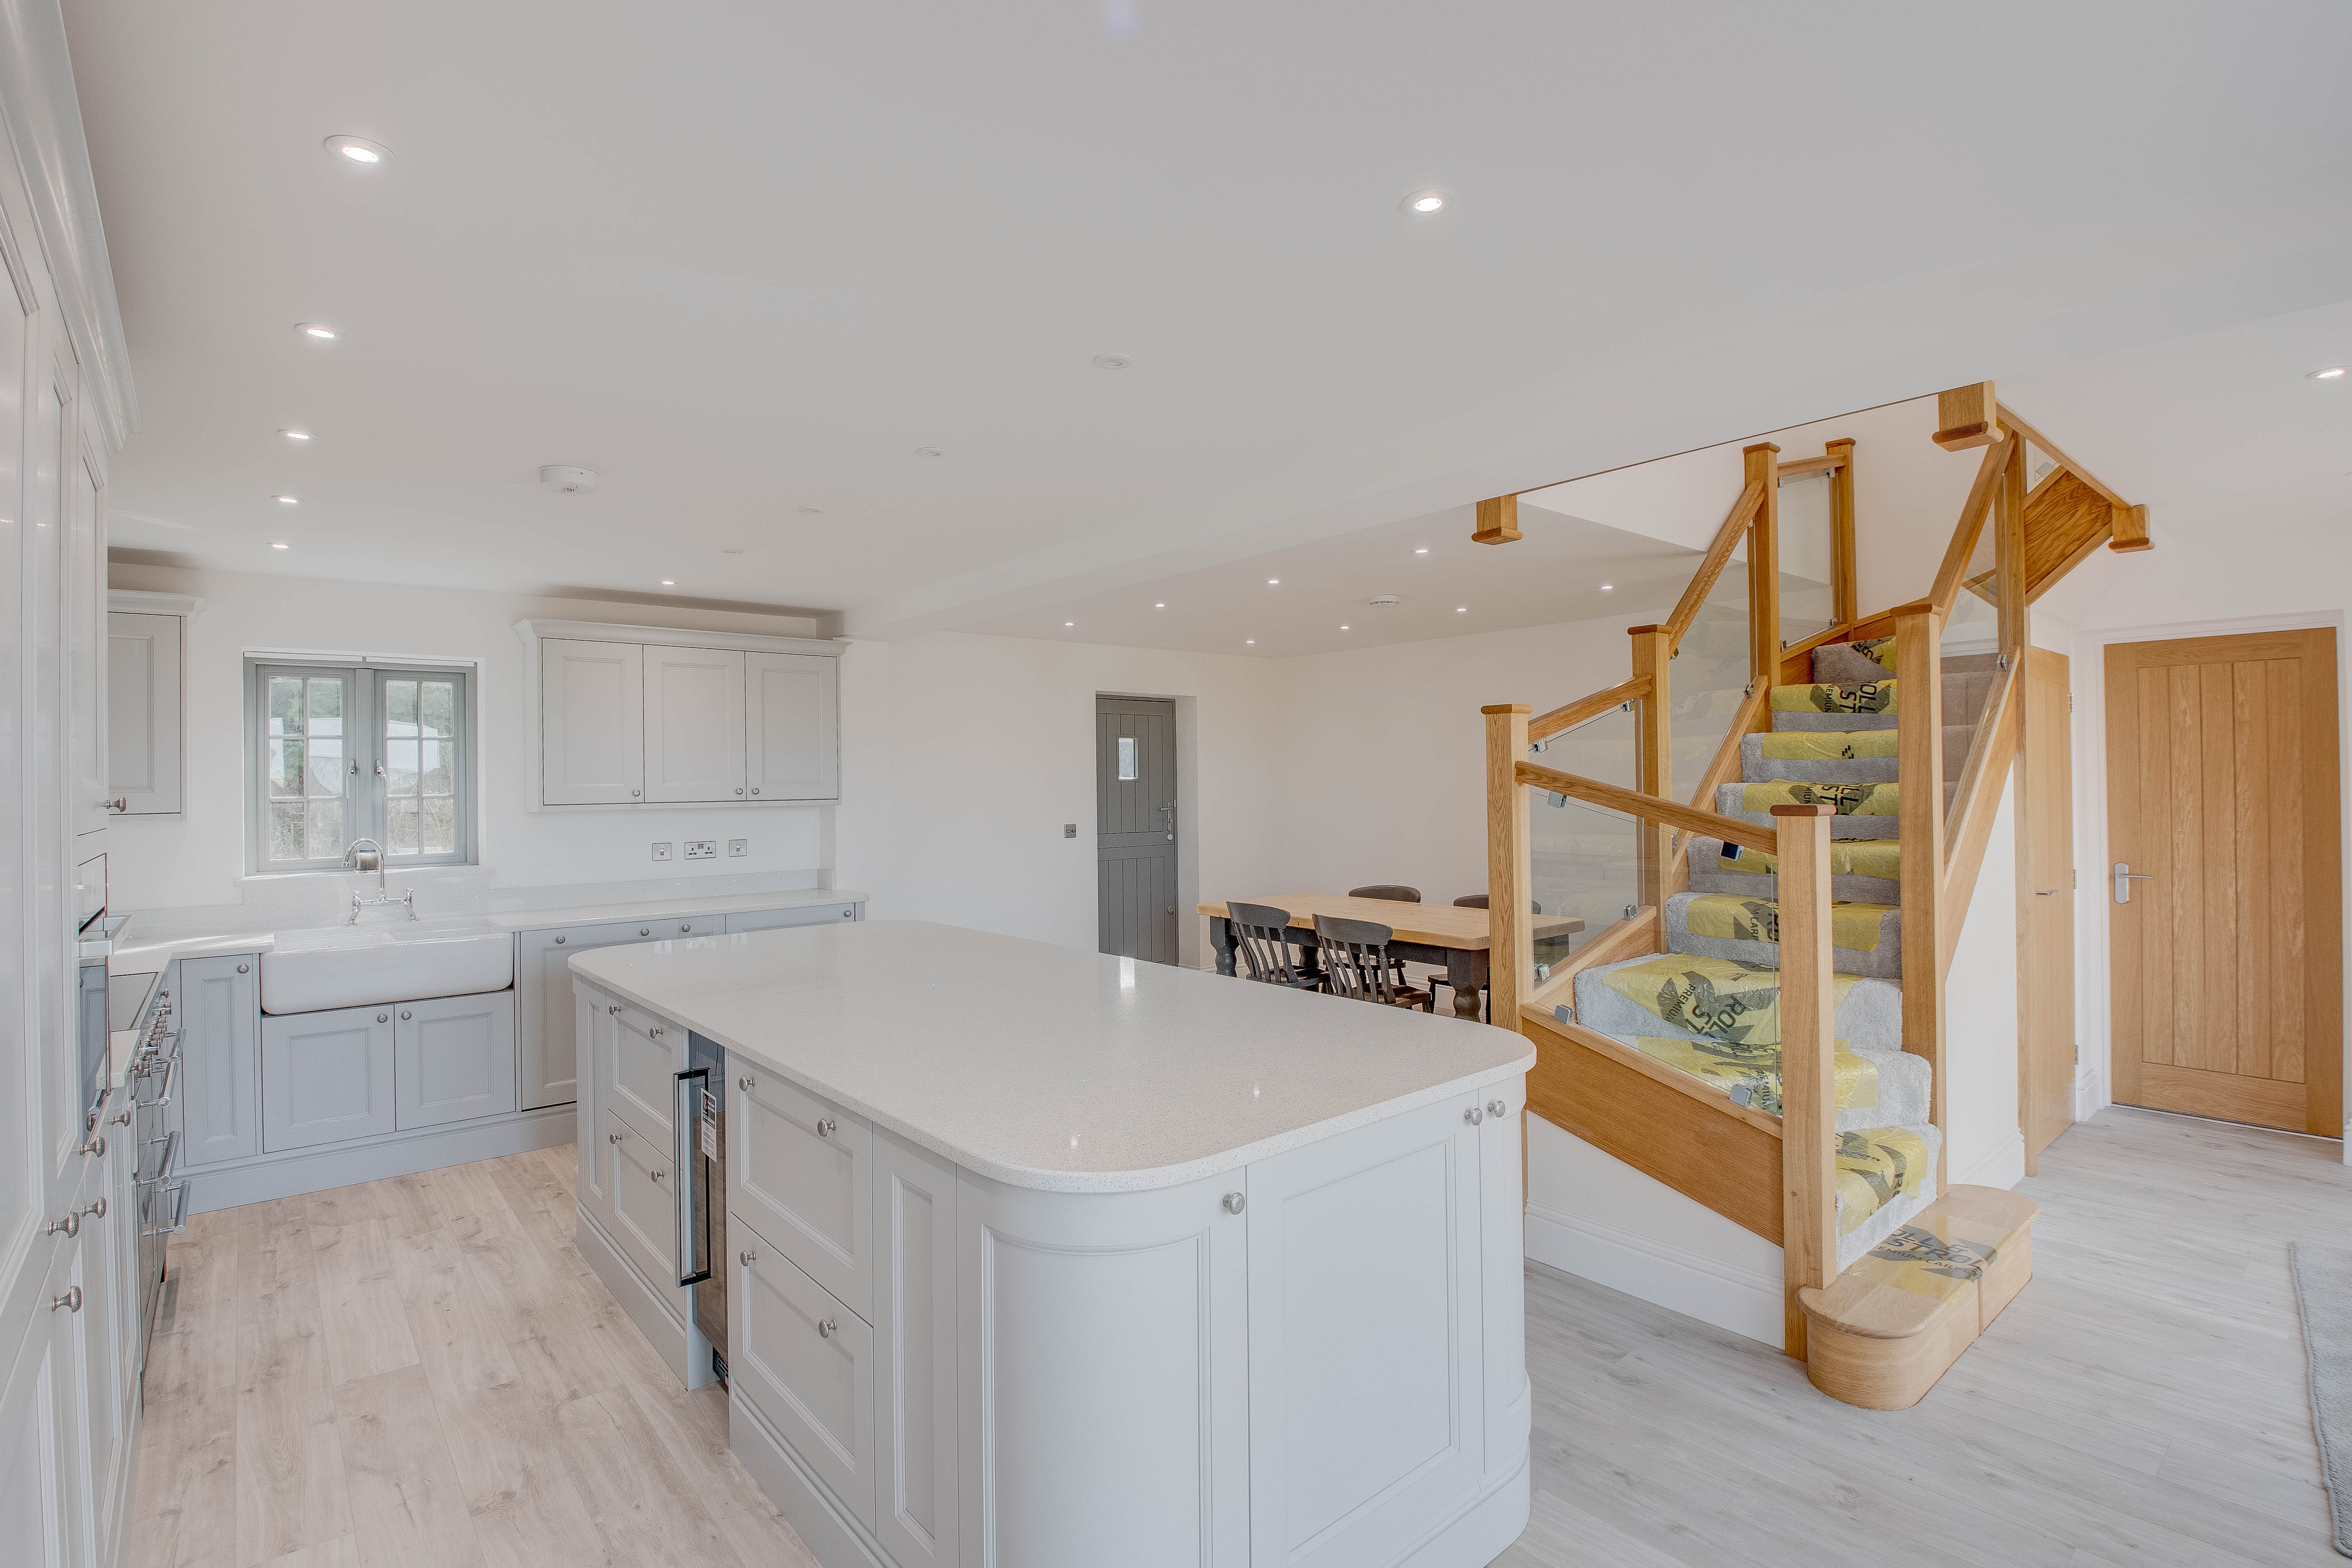 3 bed  for sale in Chadwich Grange, Bromsgrove  - Property Image 3